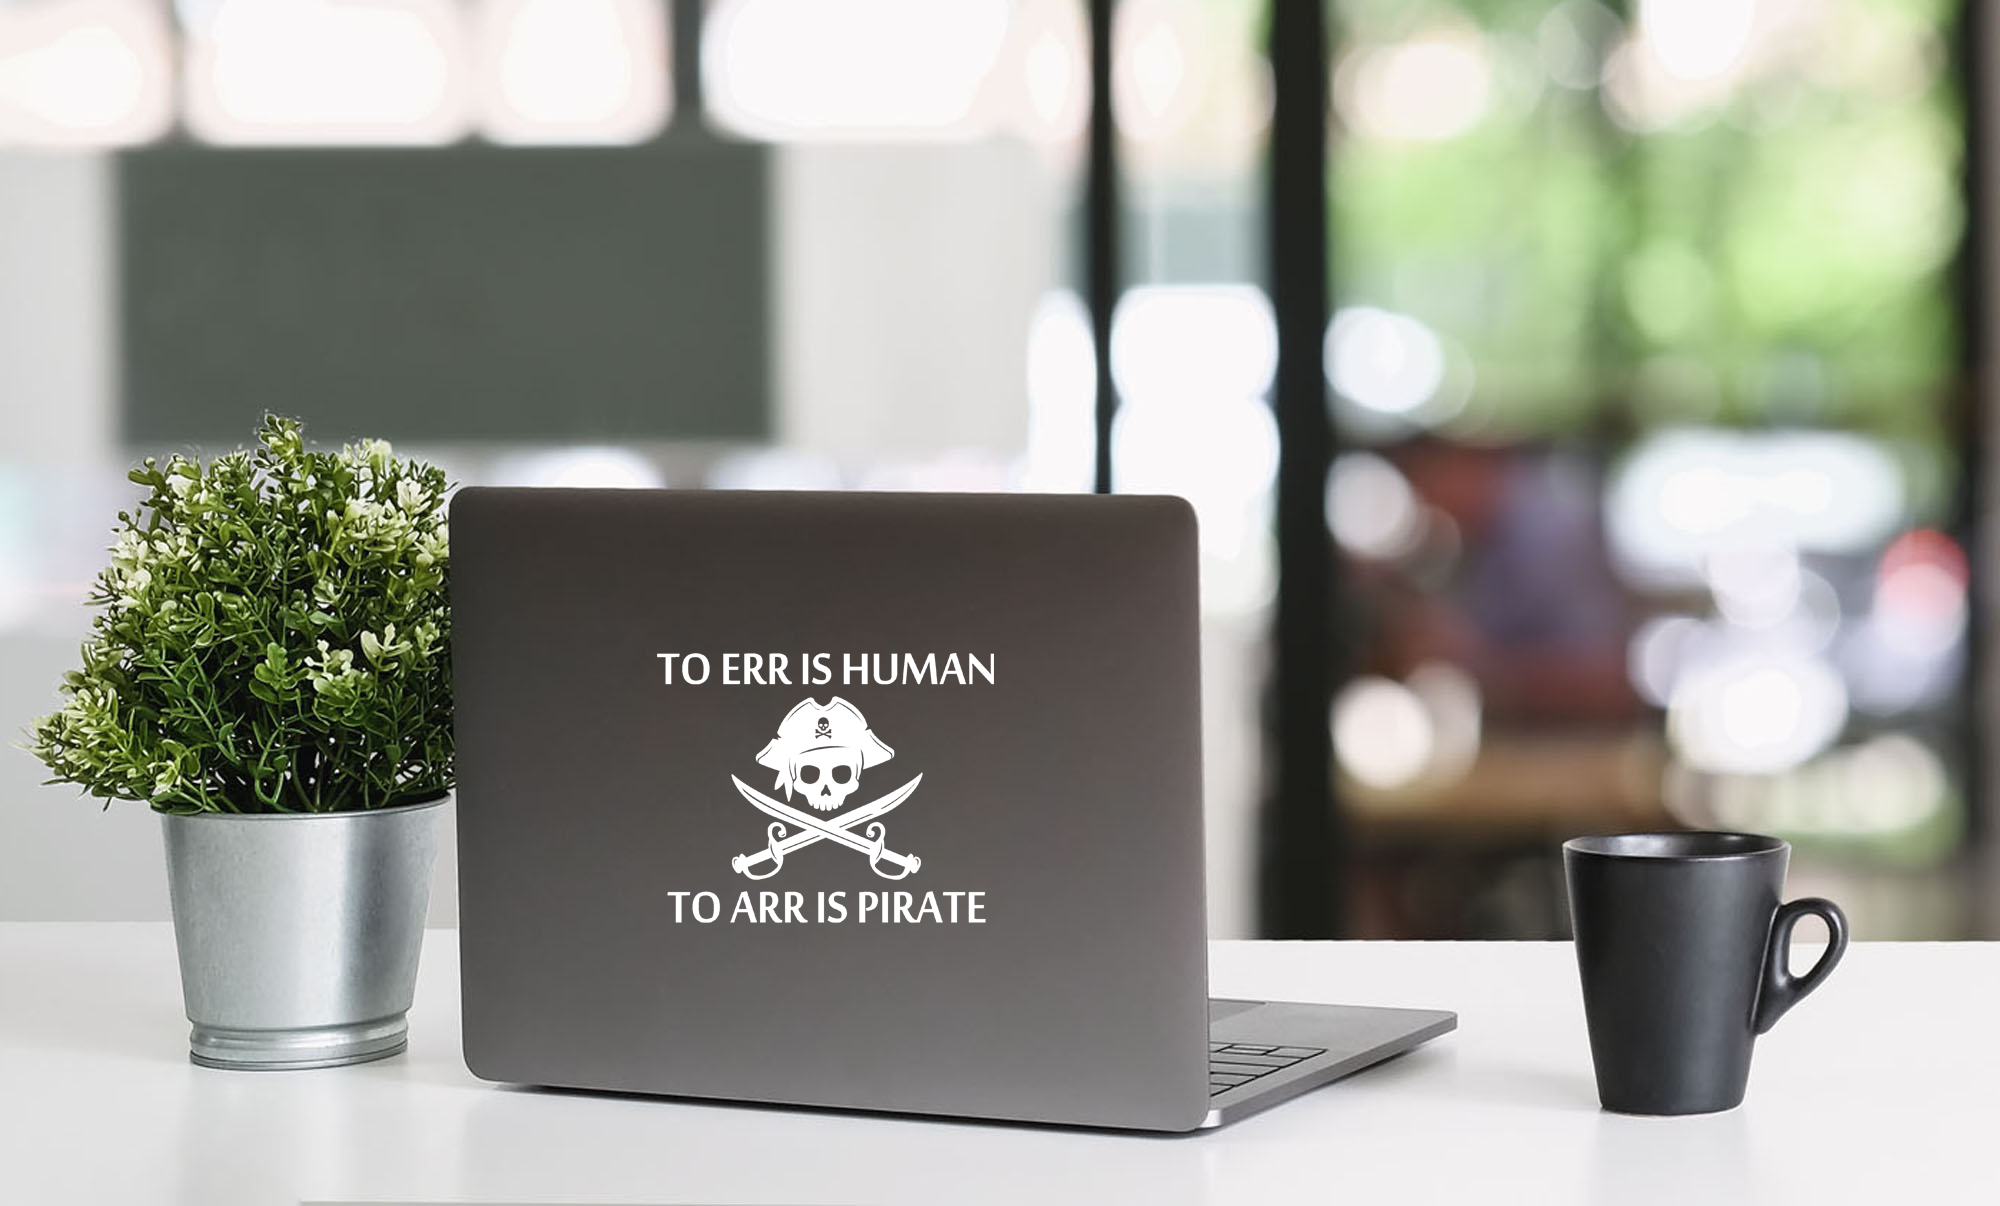 To ERR Is Human To ARR Is Pirate car decal is a humorous sticker for those who like pirates!  5"W x 4"H Car Decal, Car Sticker, Car Vinyl, Bumper Sticker, Vinyl Stickers, Vinyl Sticker.